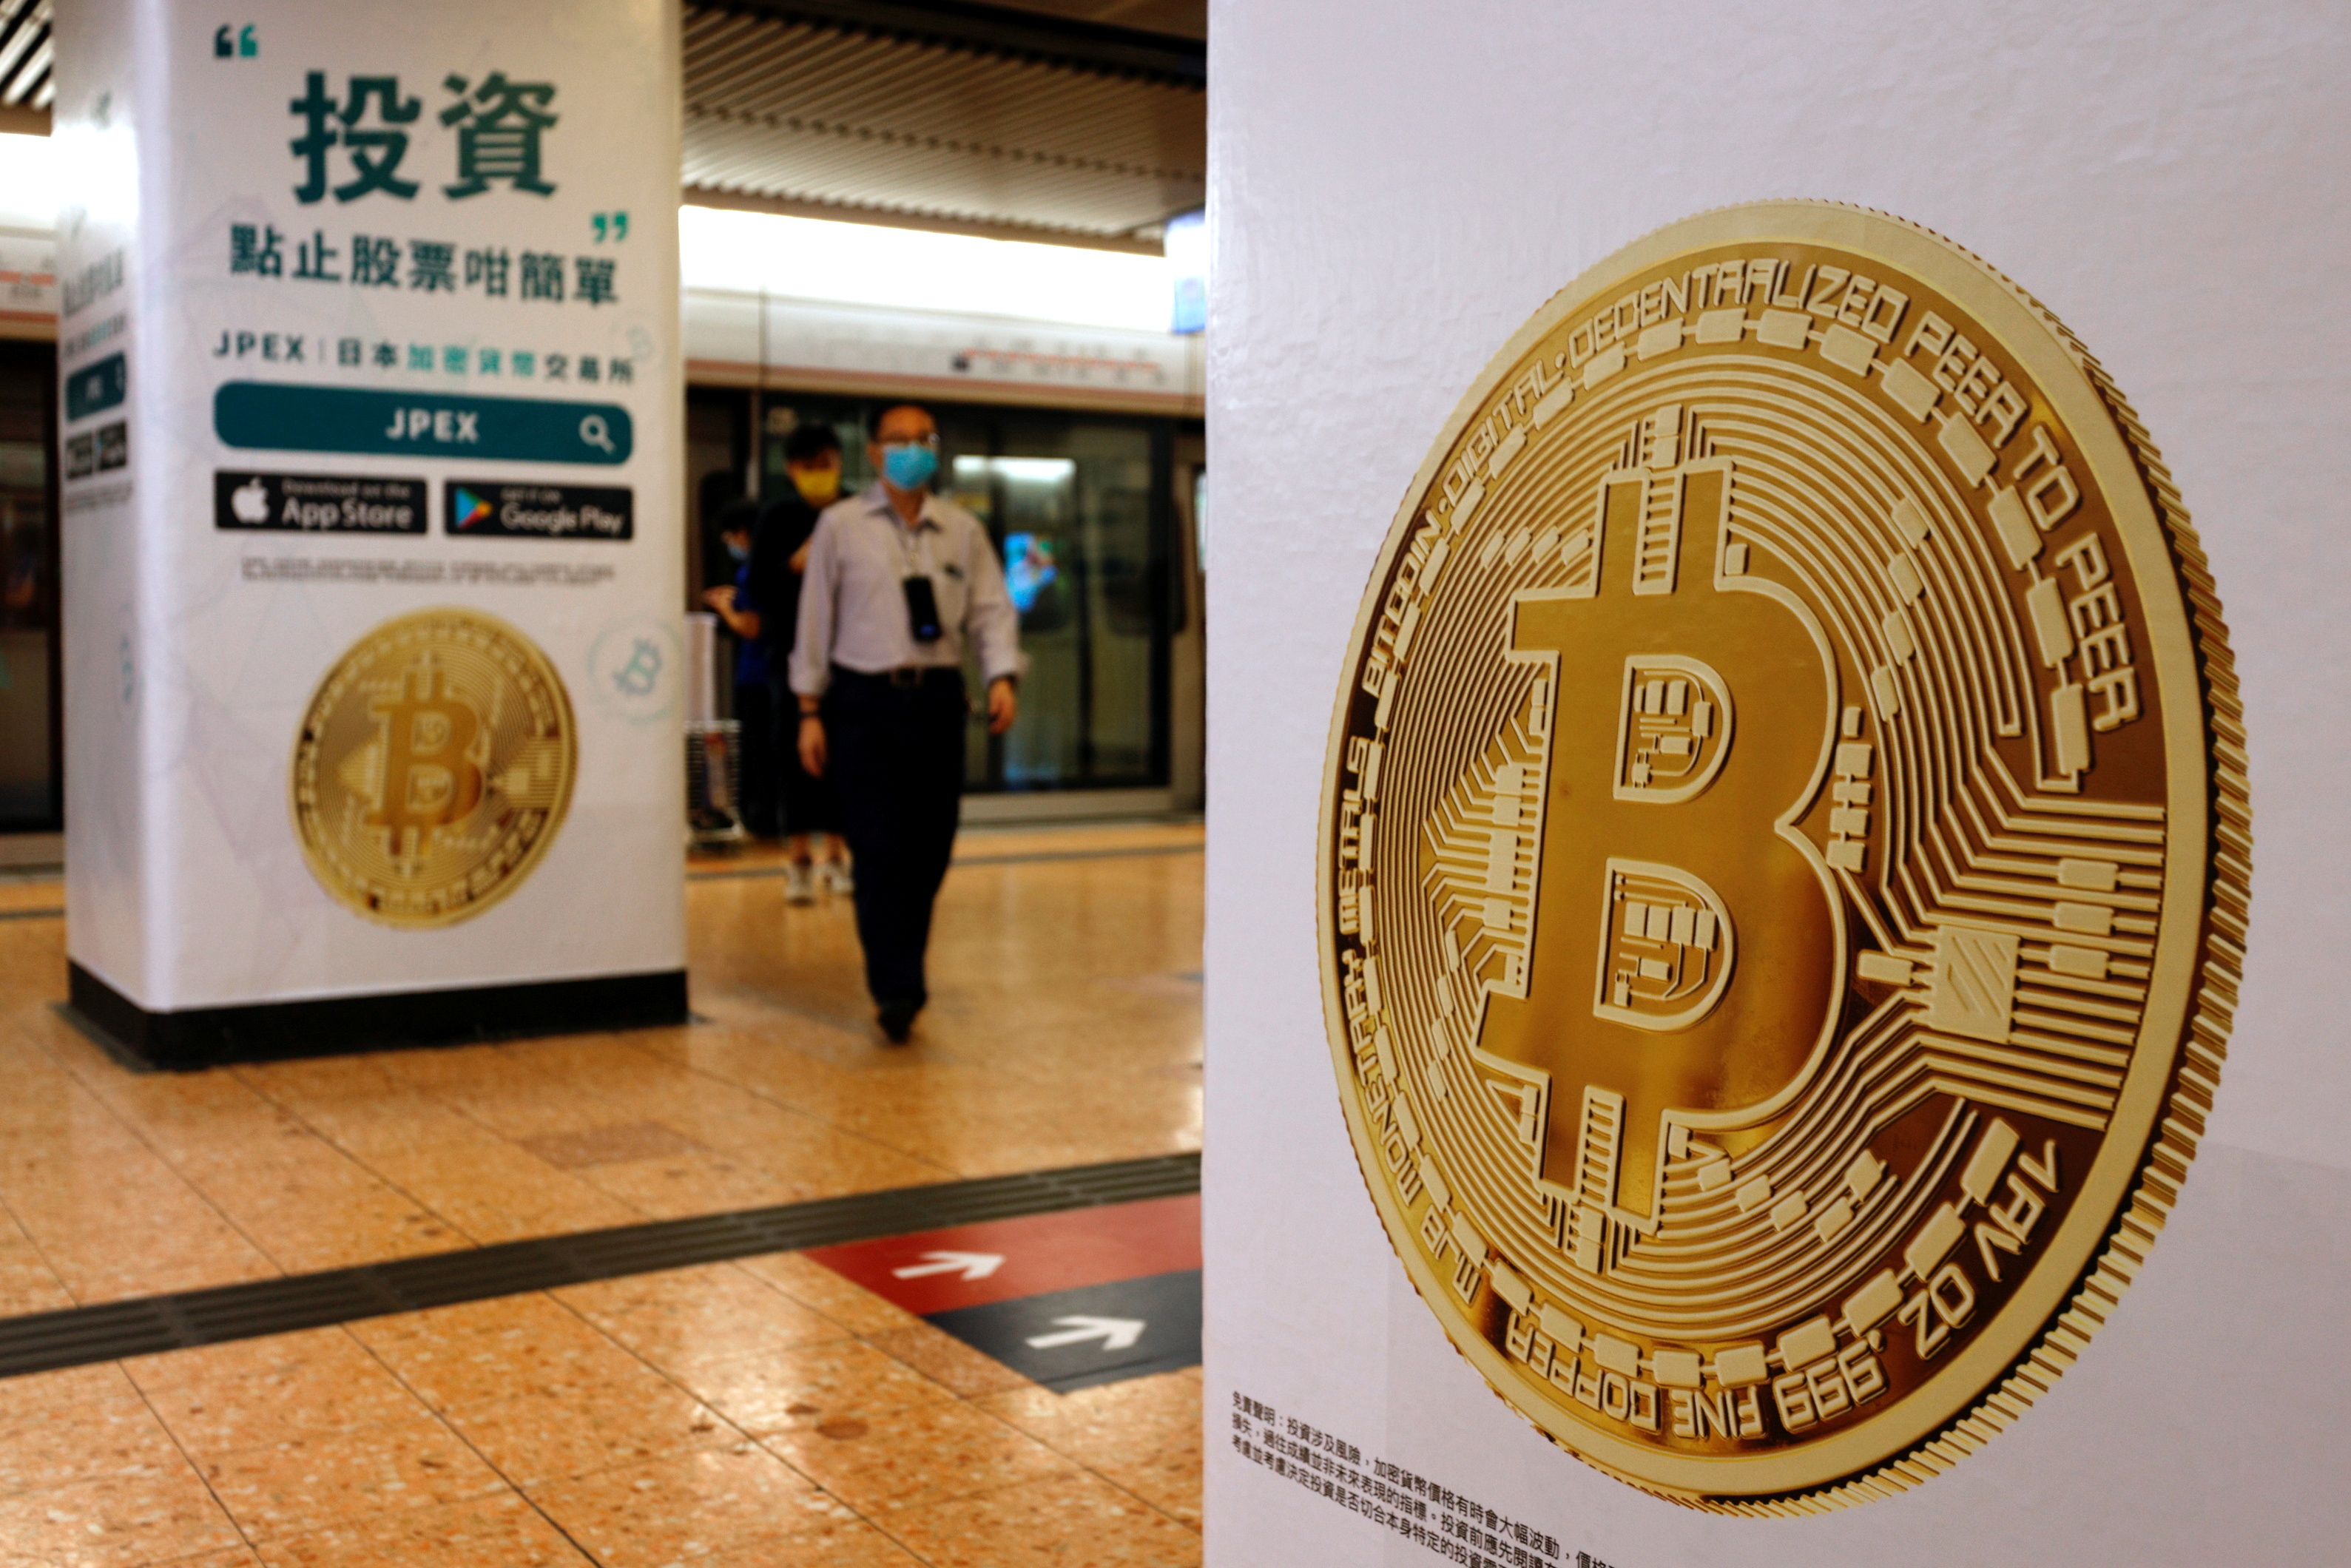 Advertisements for crypto exchange shows a Bitcoin symbol at Mass Transit Railway (MTR) station, in Hong Kong